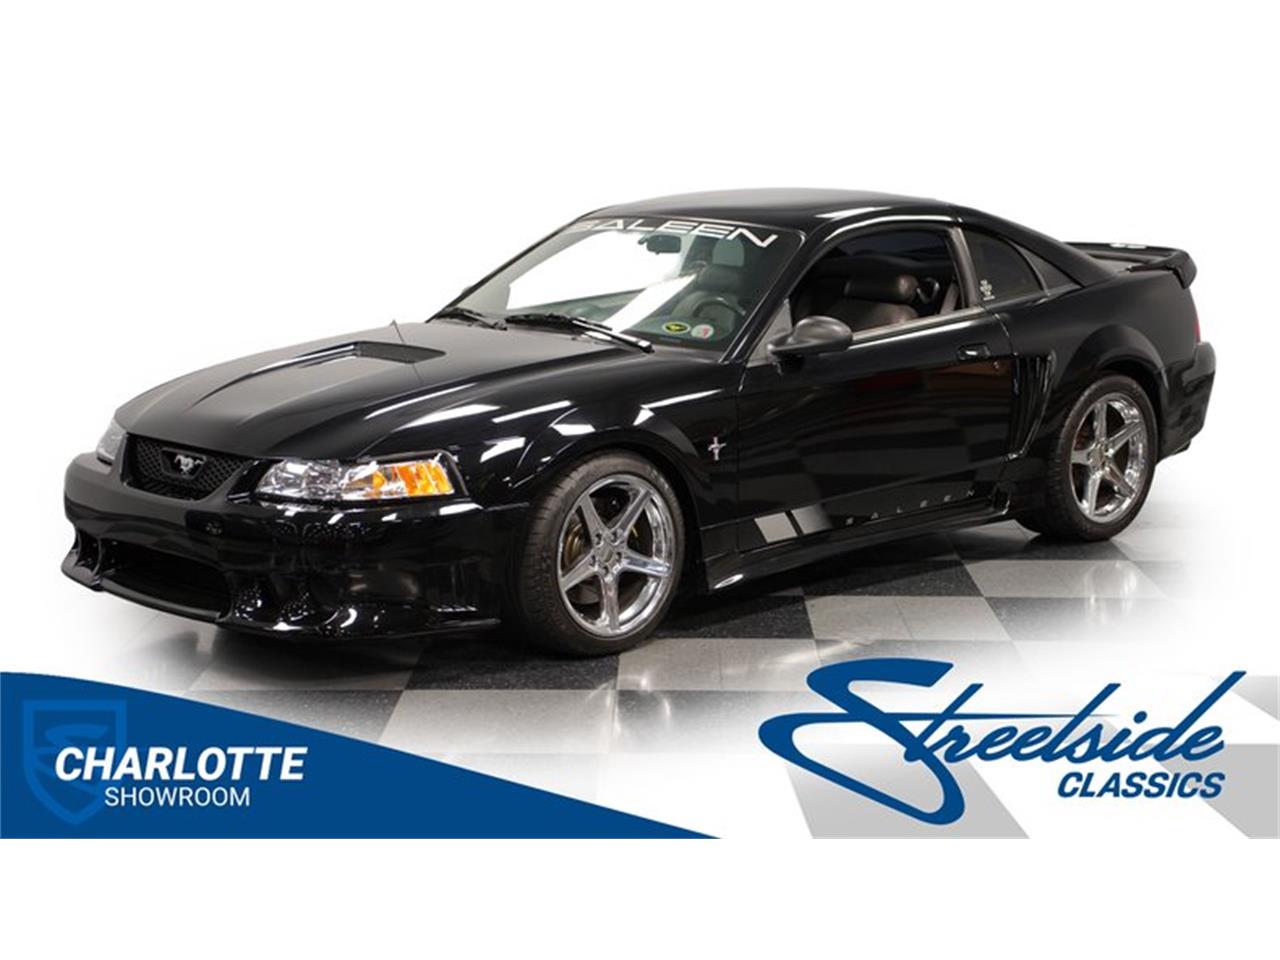 For Sale: 2000 Ford Mustang in Concord, North Carolina for sale in Concord, NC